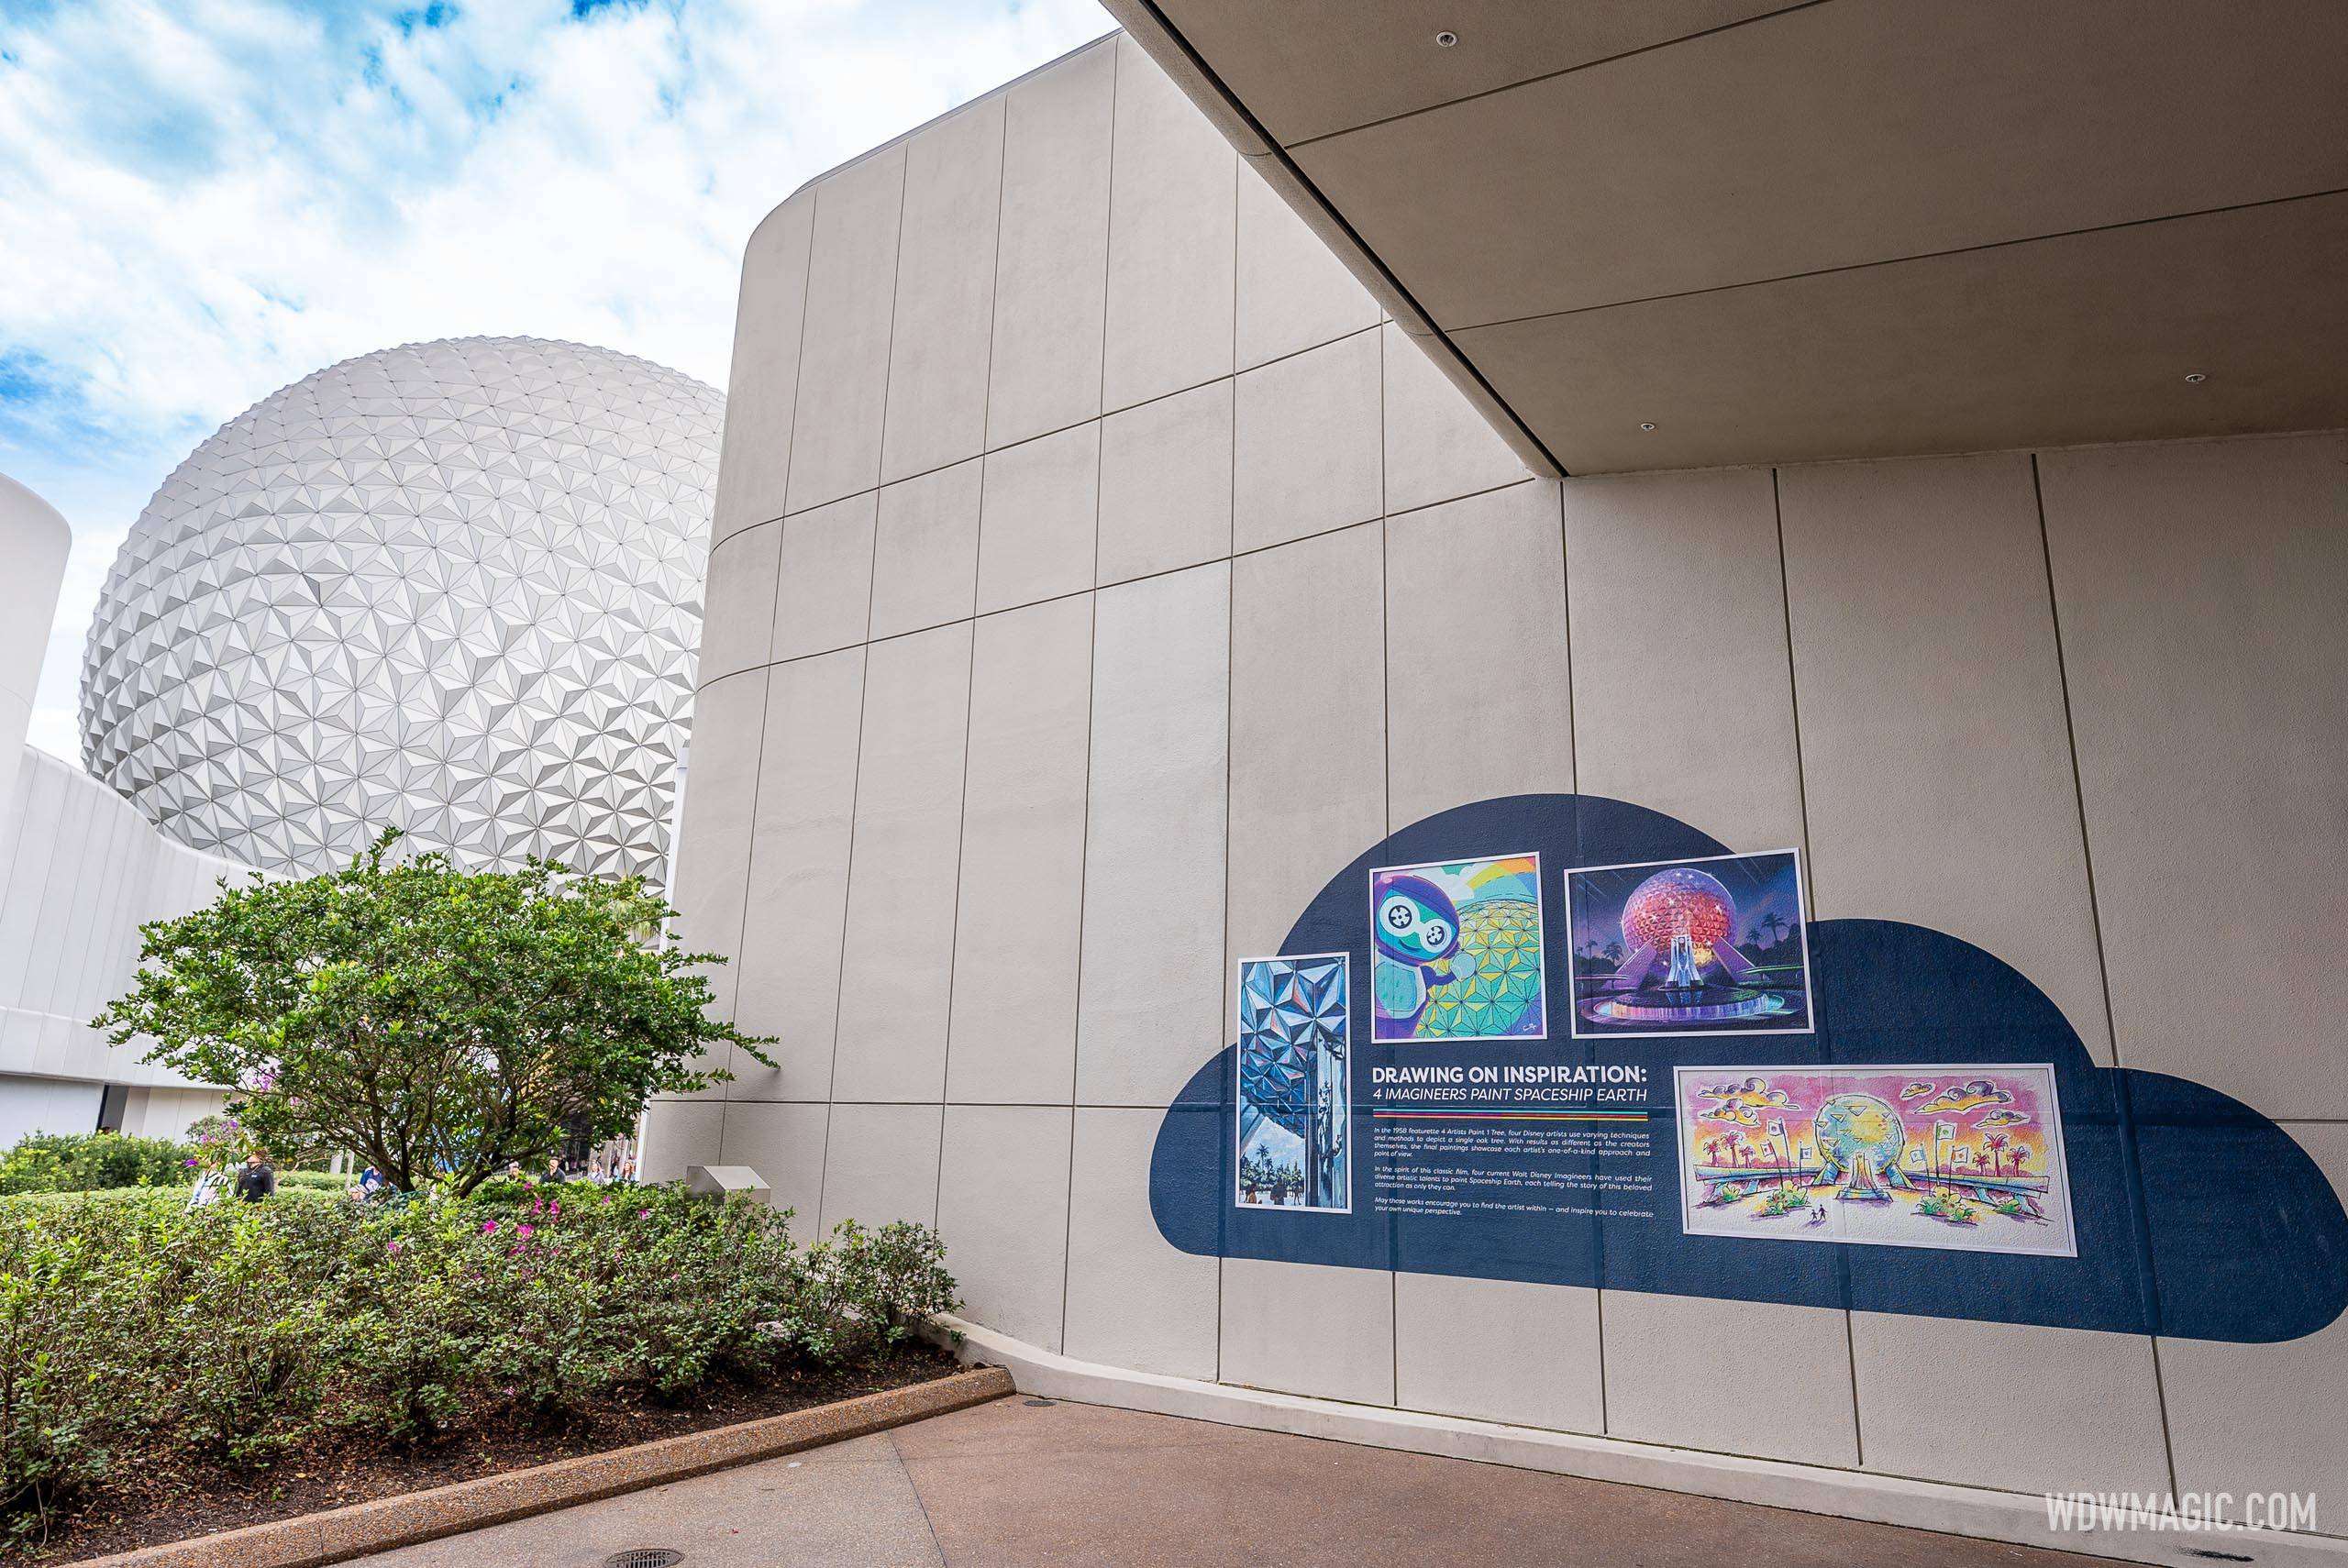 'Drawing on Inspiration: 4 Imagineers Paint Spaceship Earth' mural